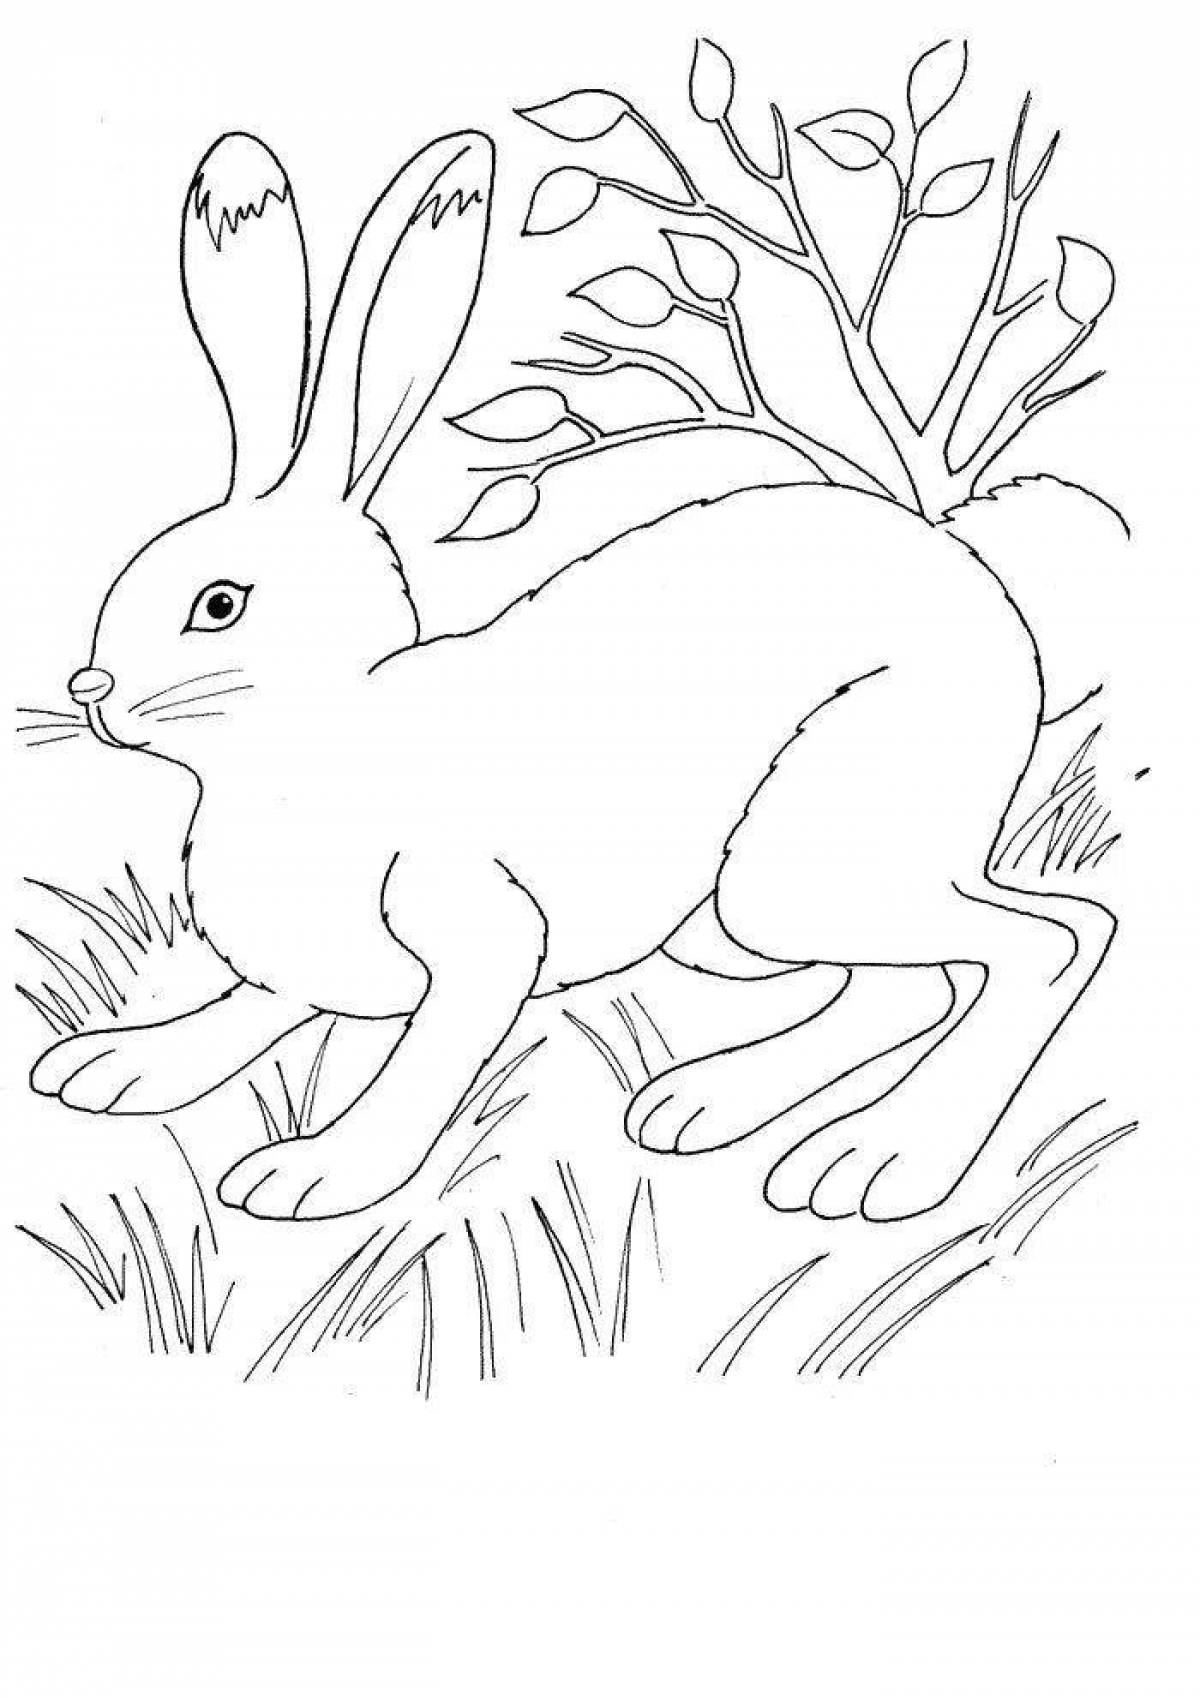 Color-frenzy coloring picture of a hare for kids